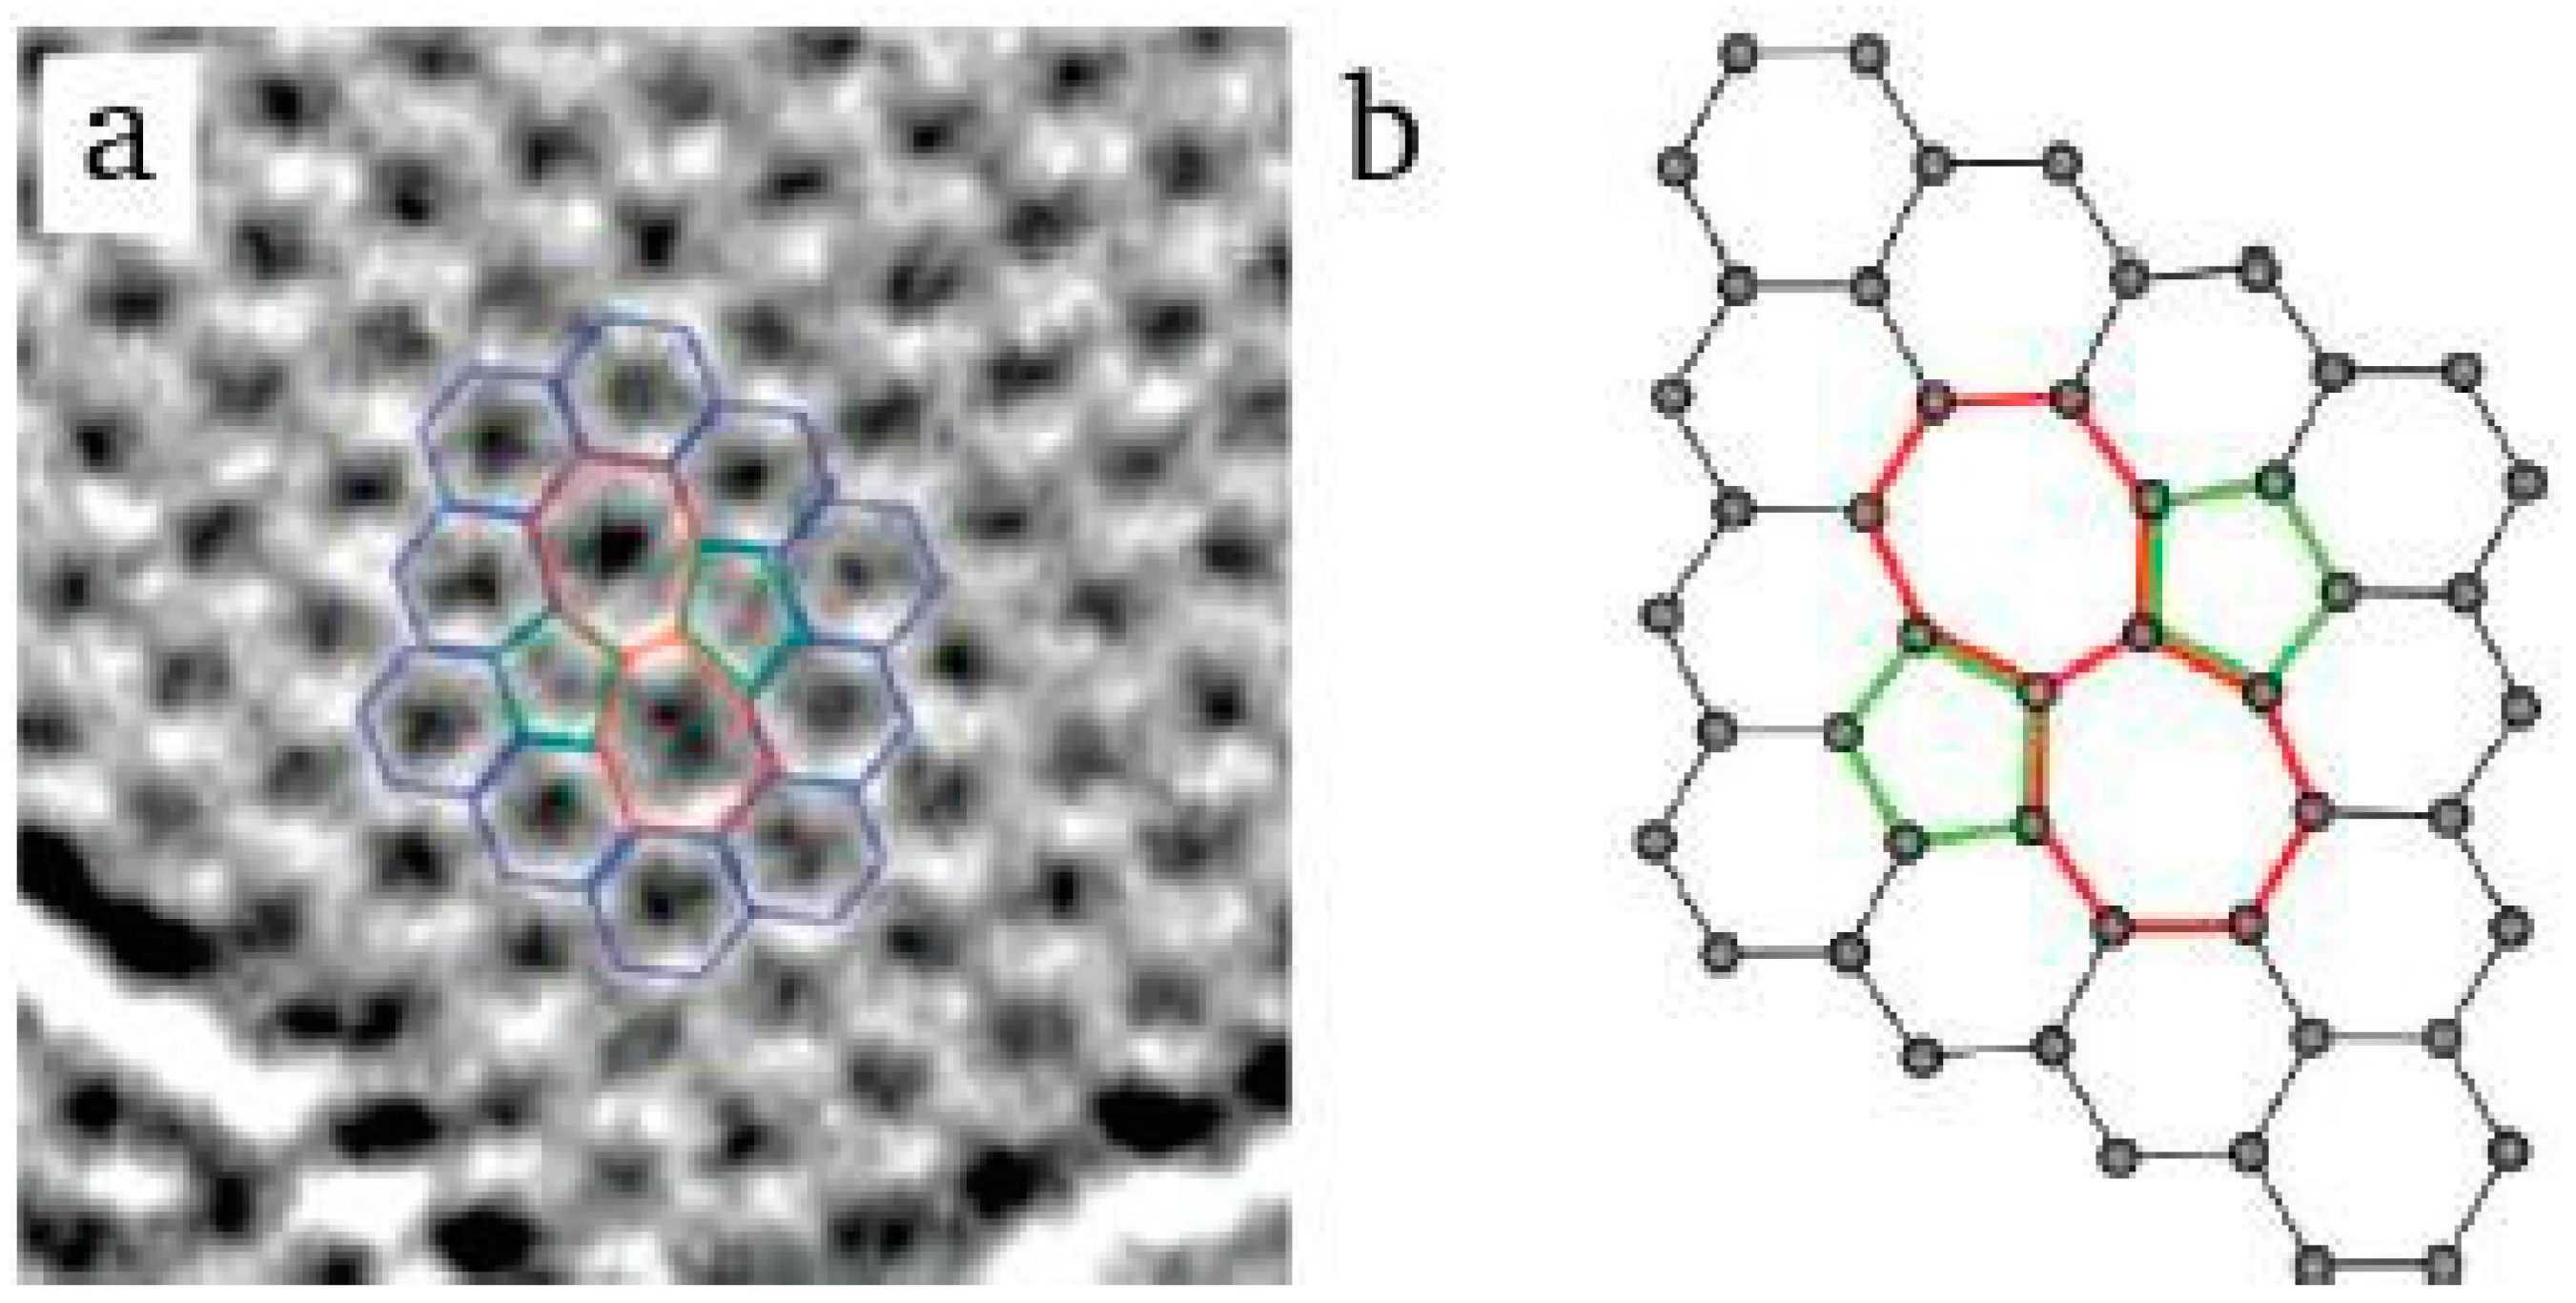 Micromachines | Free Full-Text | A on Lattice Defects in Graphene: Types, Generation, Effects and Regulation | HTML